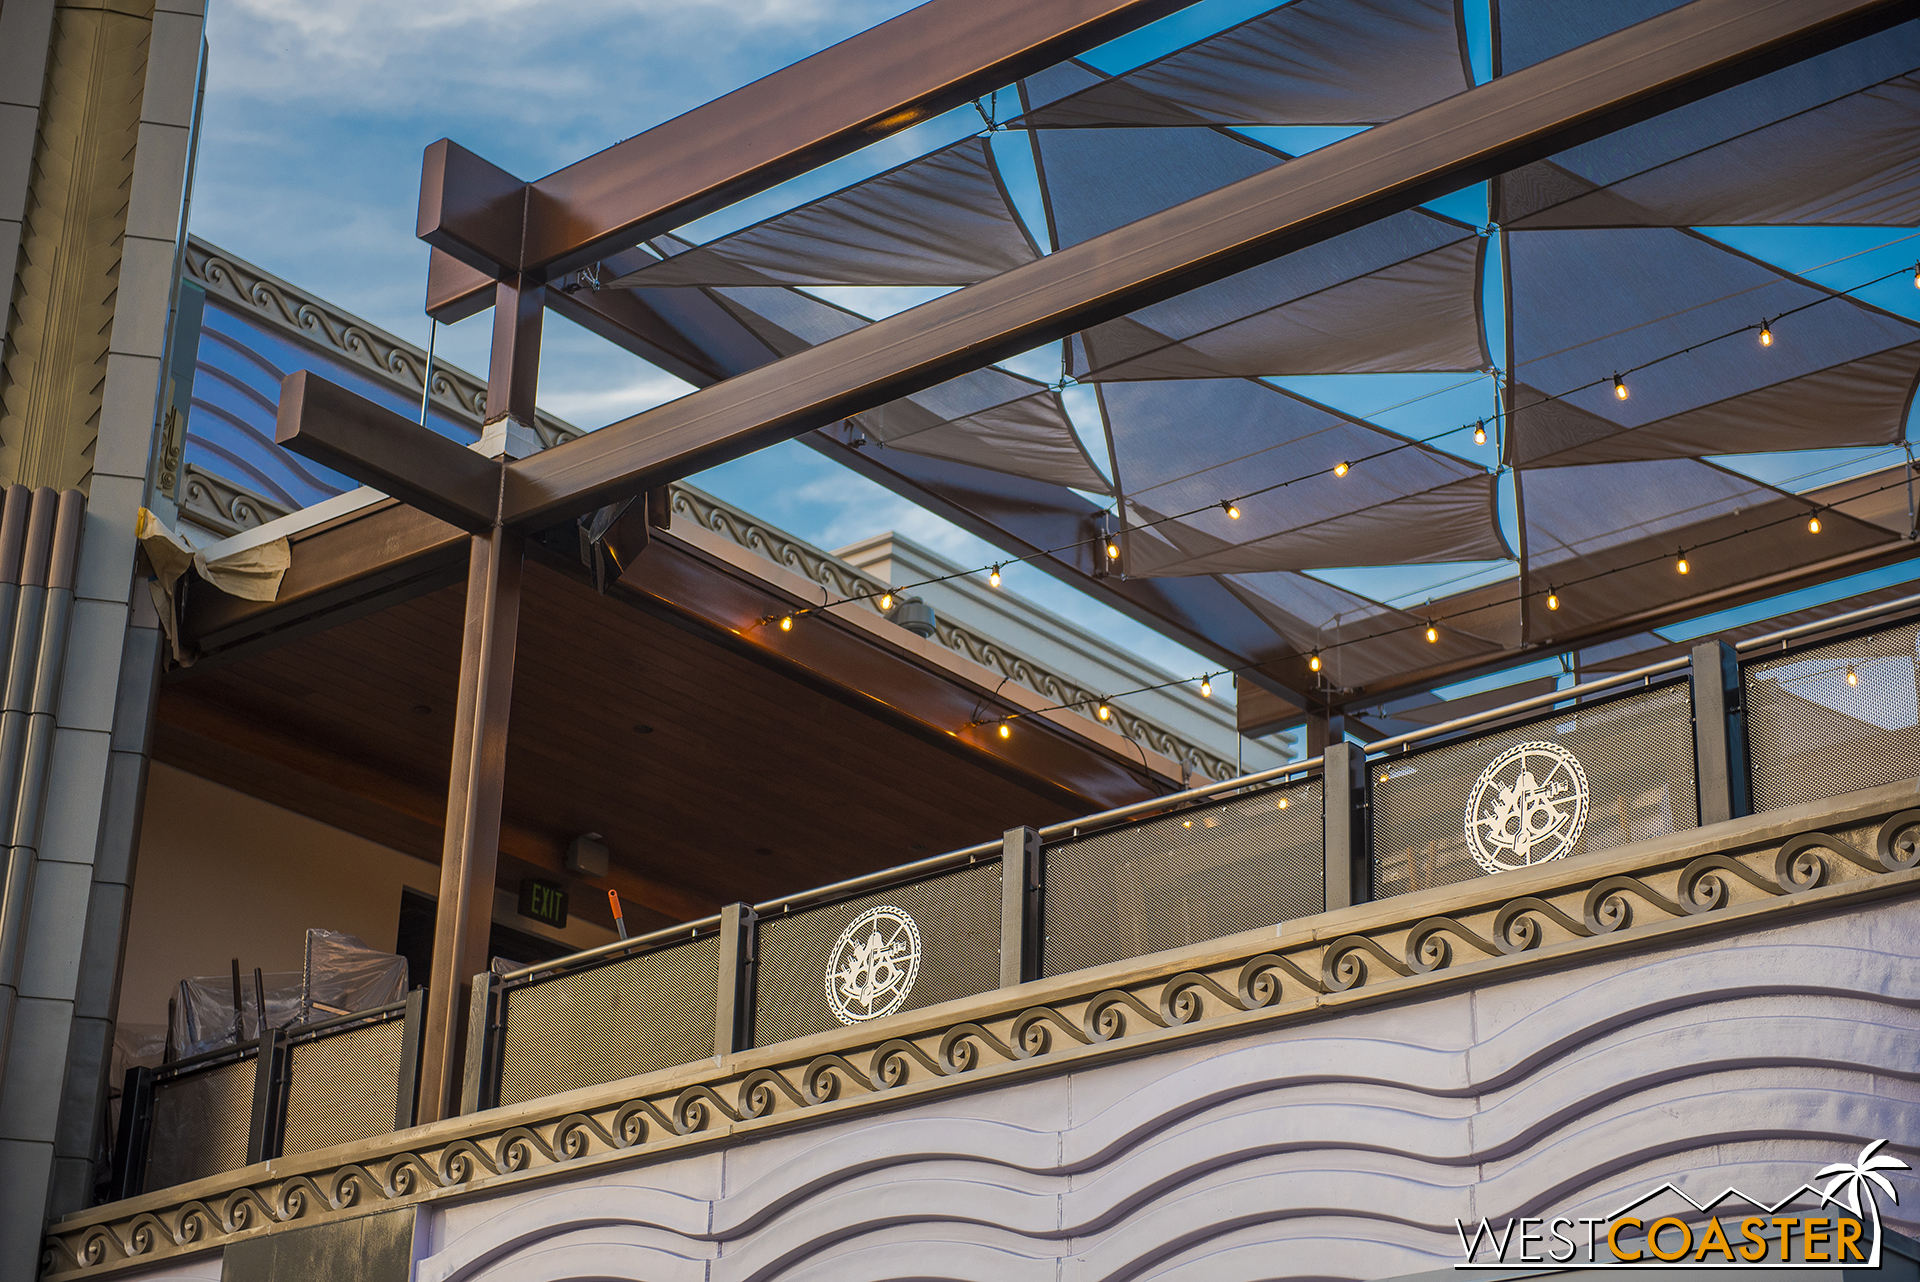  Ballast Point will also have outdoor seating over the roof of Wetzel’s Pretzels as well. 